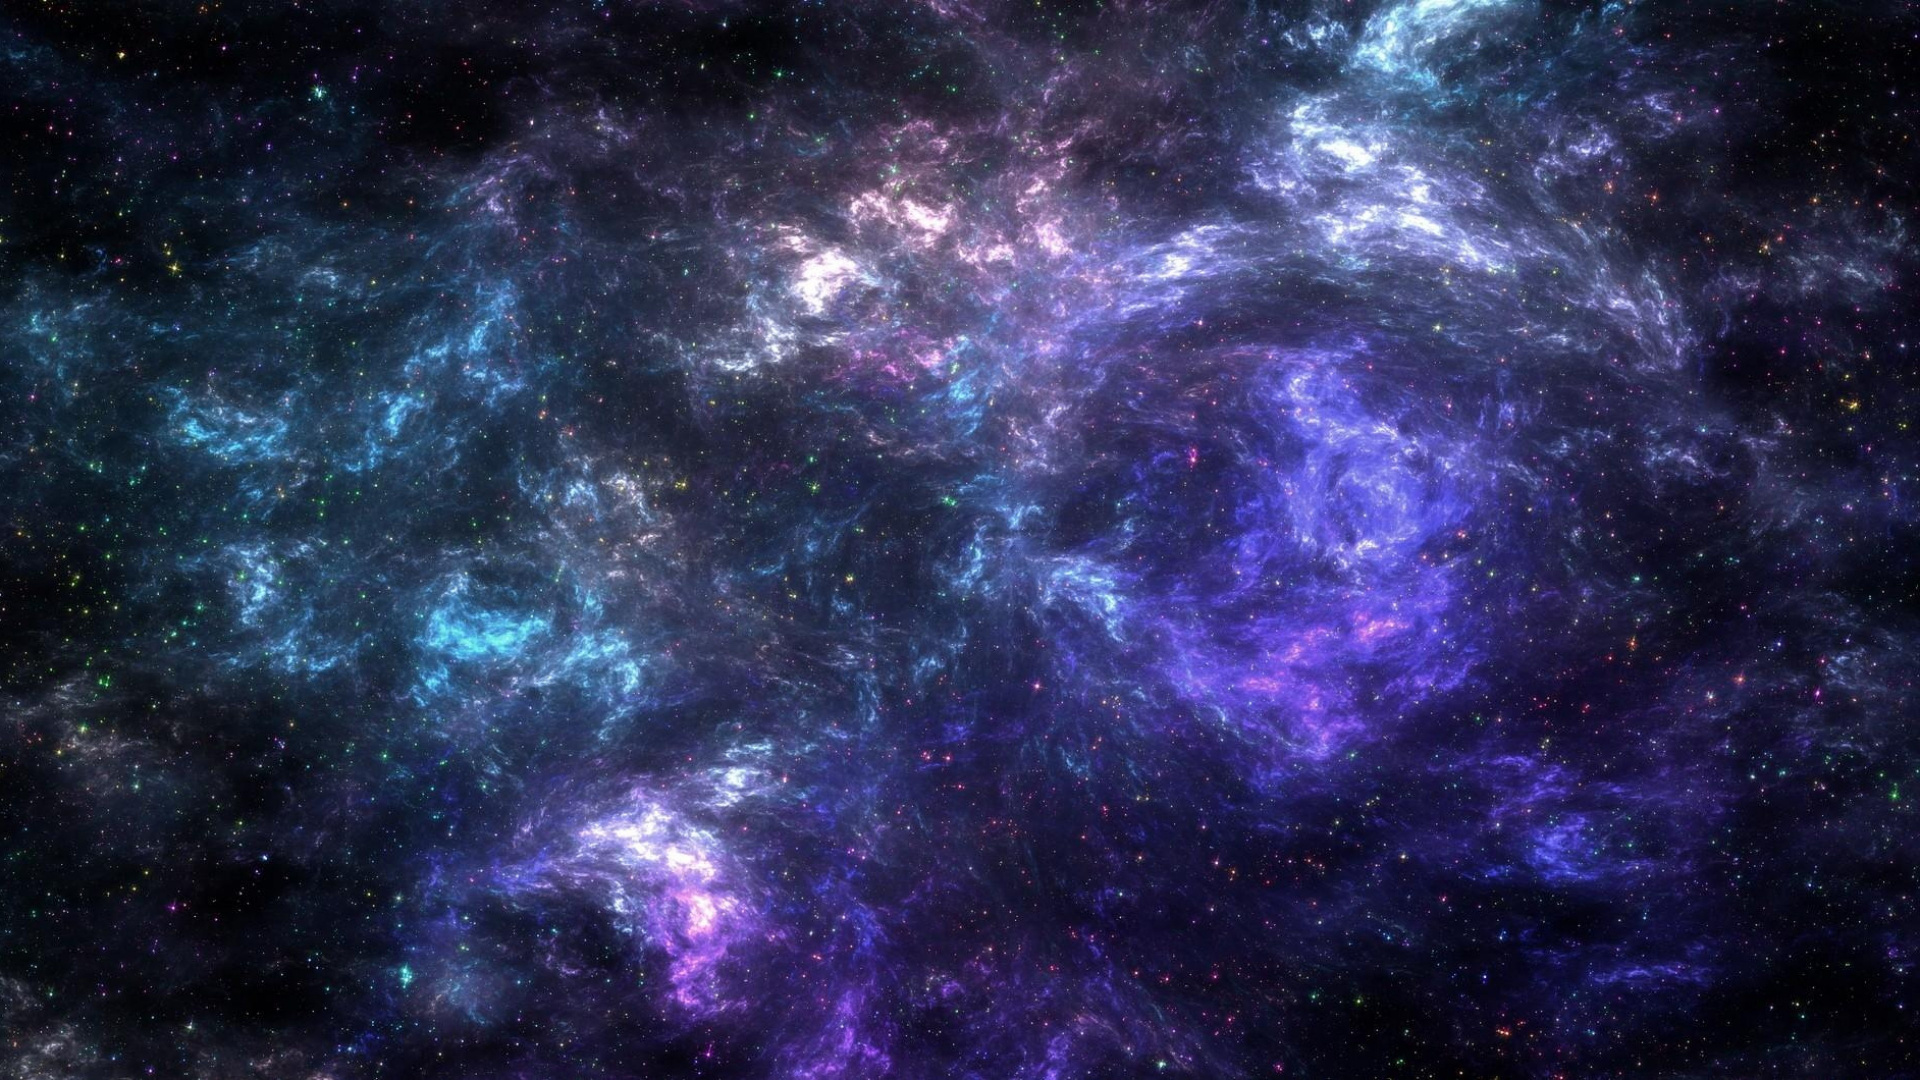 Purple and Blue Galaxy Illustration. Wallpaper in 1920x1080 Resolution